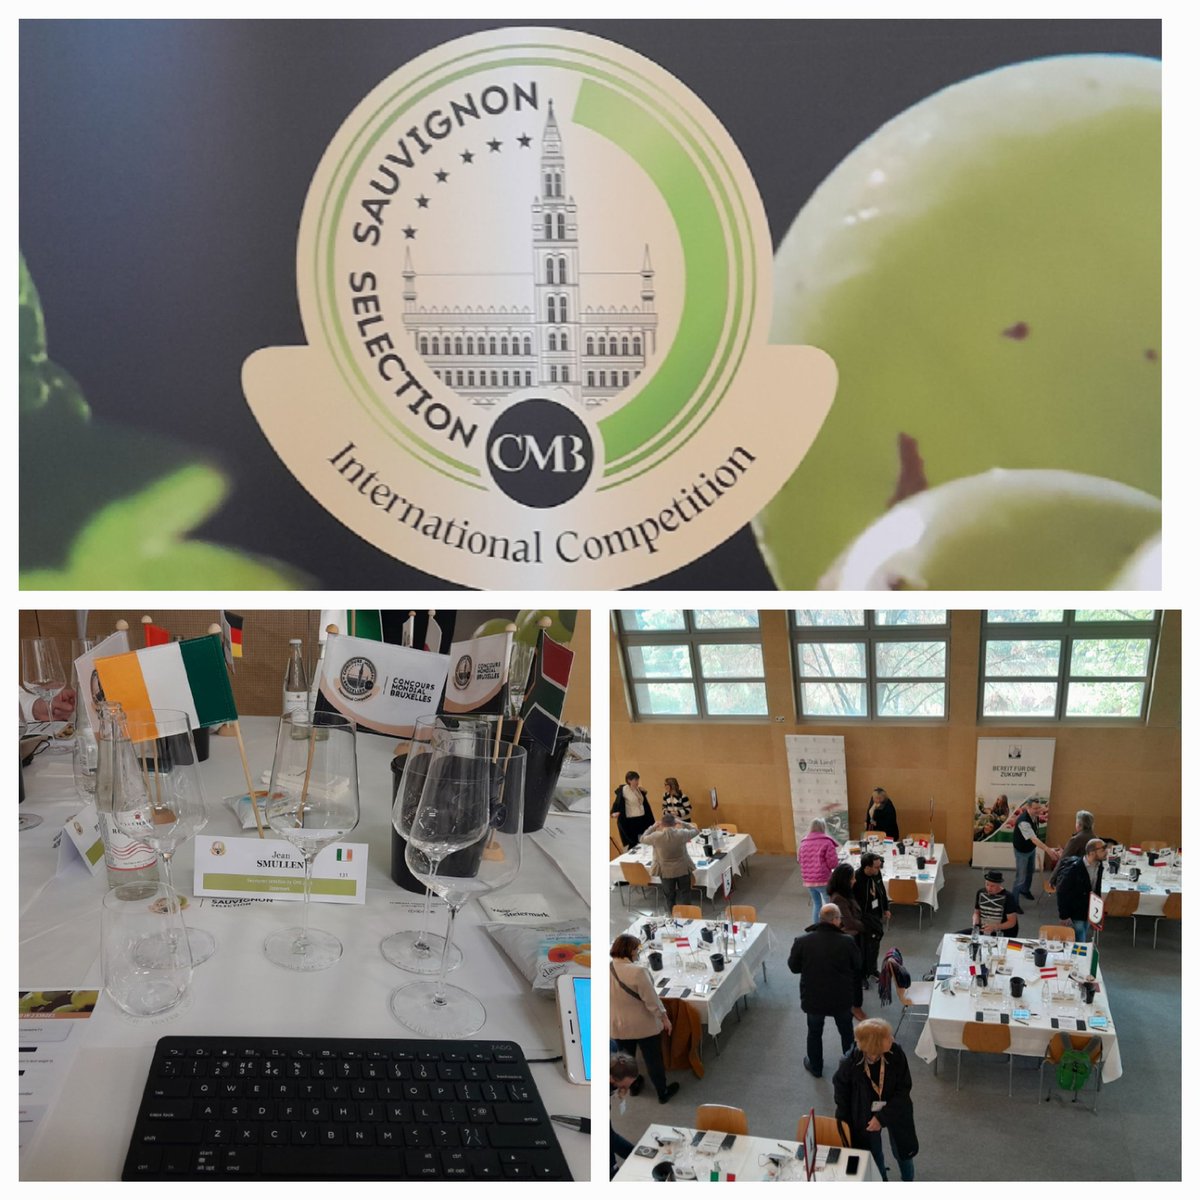 Day 1 of Concours Sauvignon in Styria as guest of Wein Steiermark. Looking forward to exploring Sauvignon from this region. #CMB2024 #SauvignonSelection